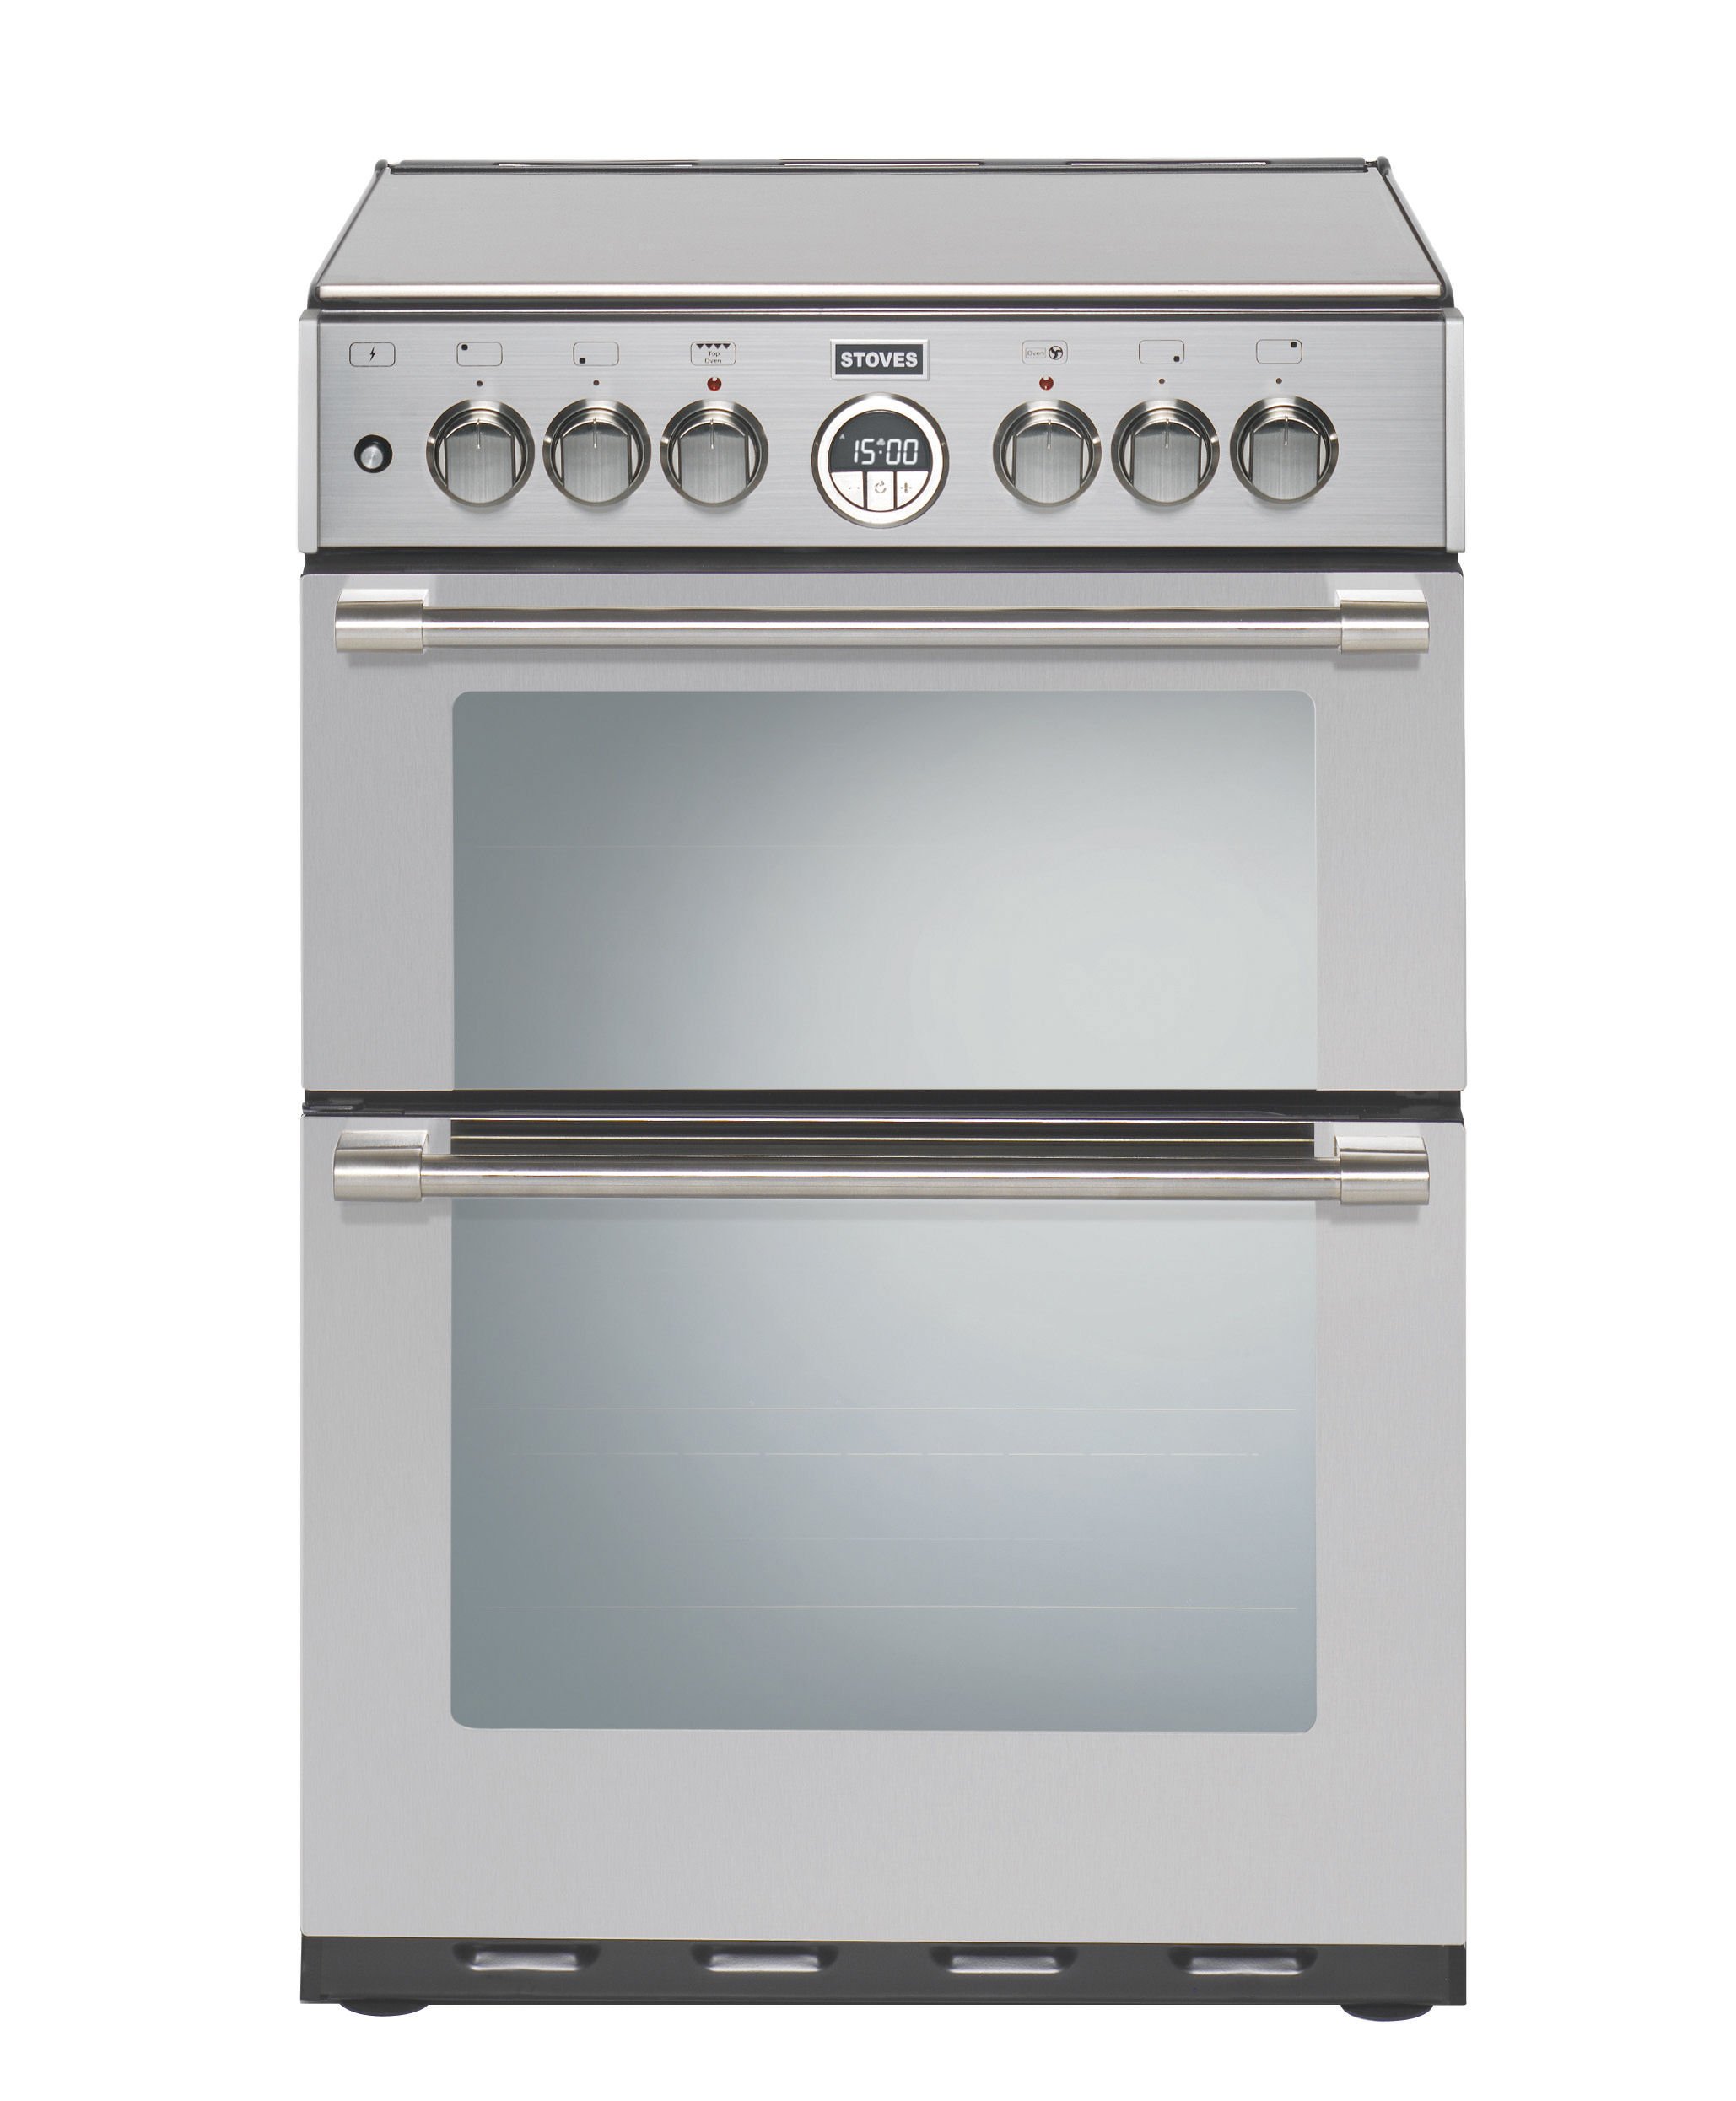 60cm Dual Fuel Range Cooker With Glass Lid, 4 Burner Gas Hob, Conventional Oven & Grill and Fanned Main Oven